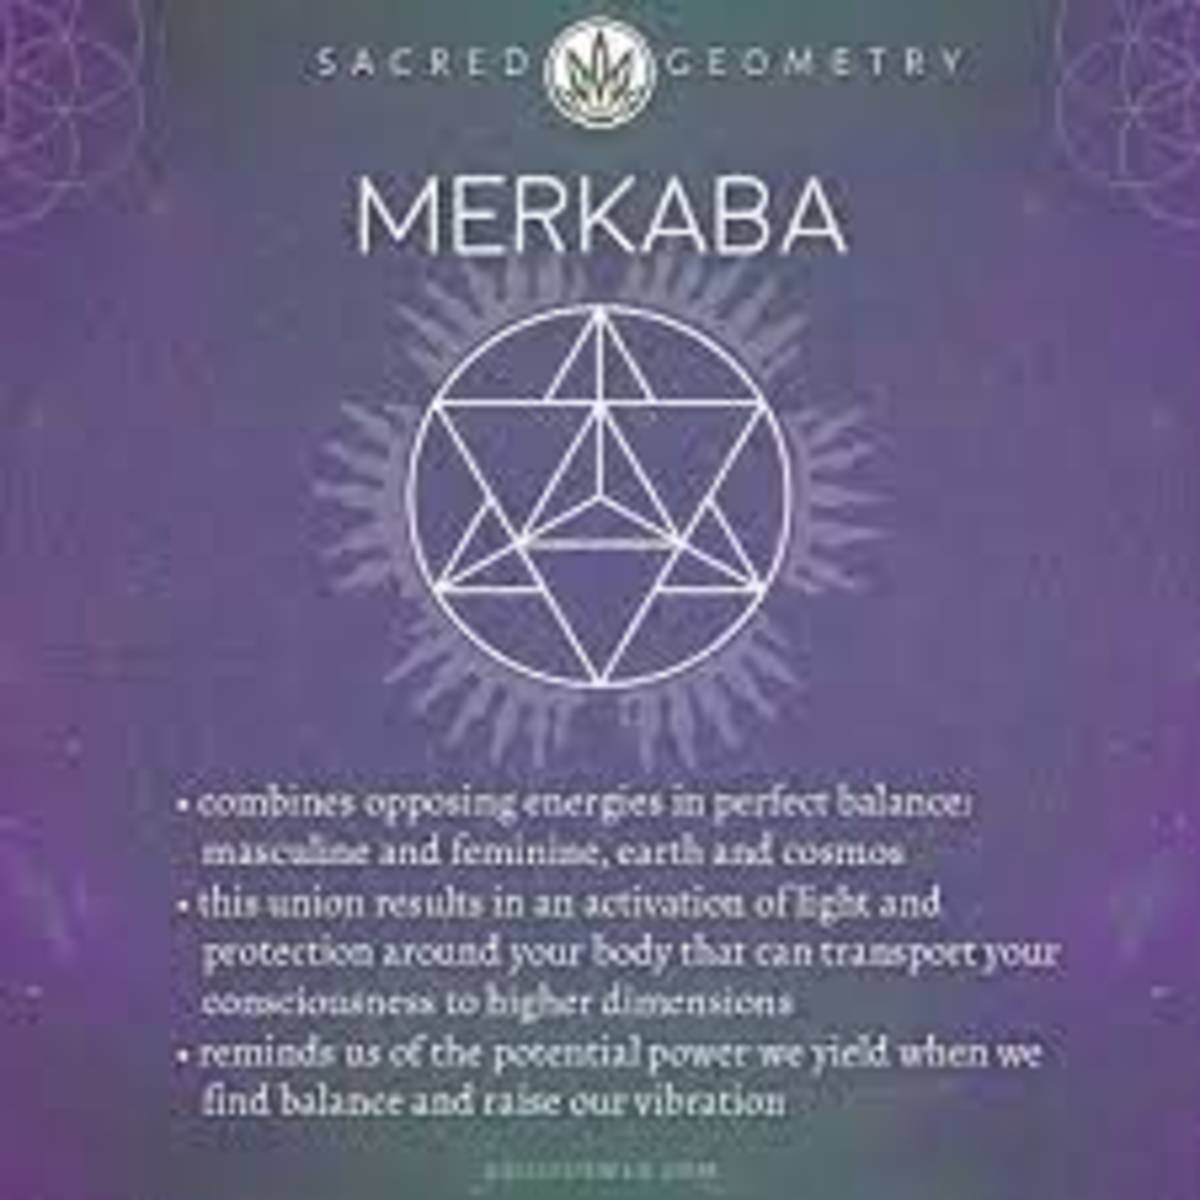 A Guide to Merkabah and Unlocking the Divinity Within